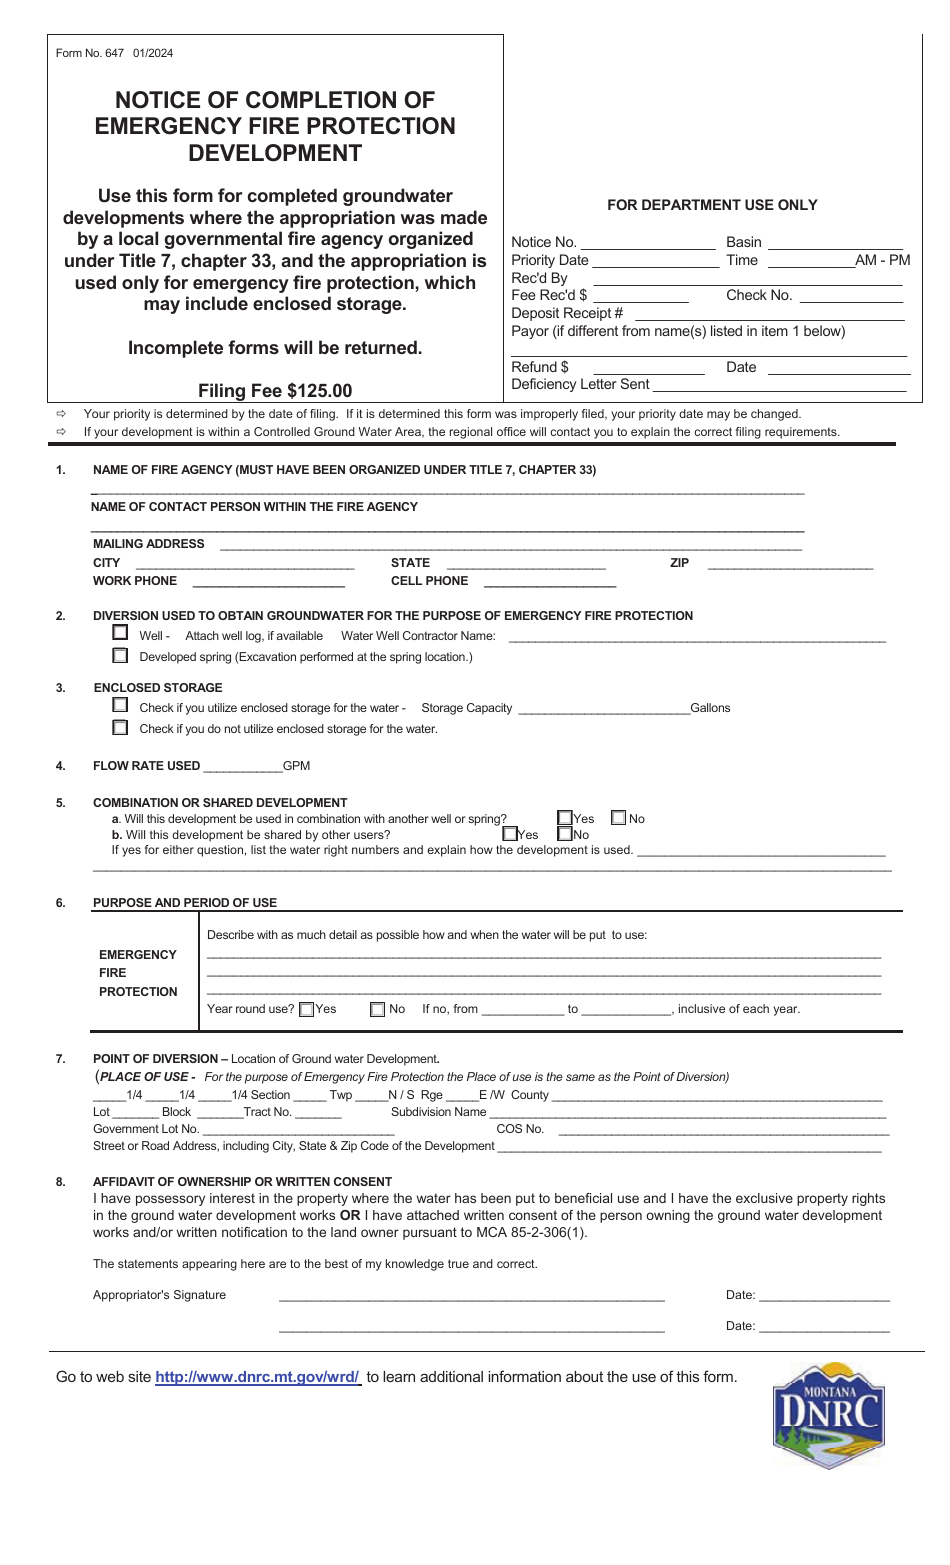 Form 647 Notice of Completion of Emergency Fire Protection Development - Montana, Page 1